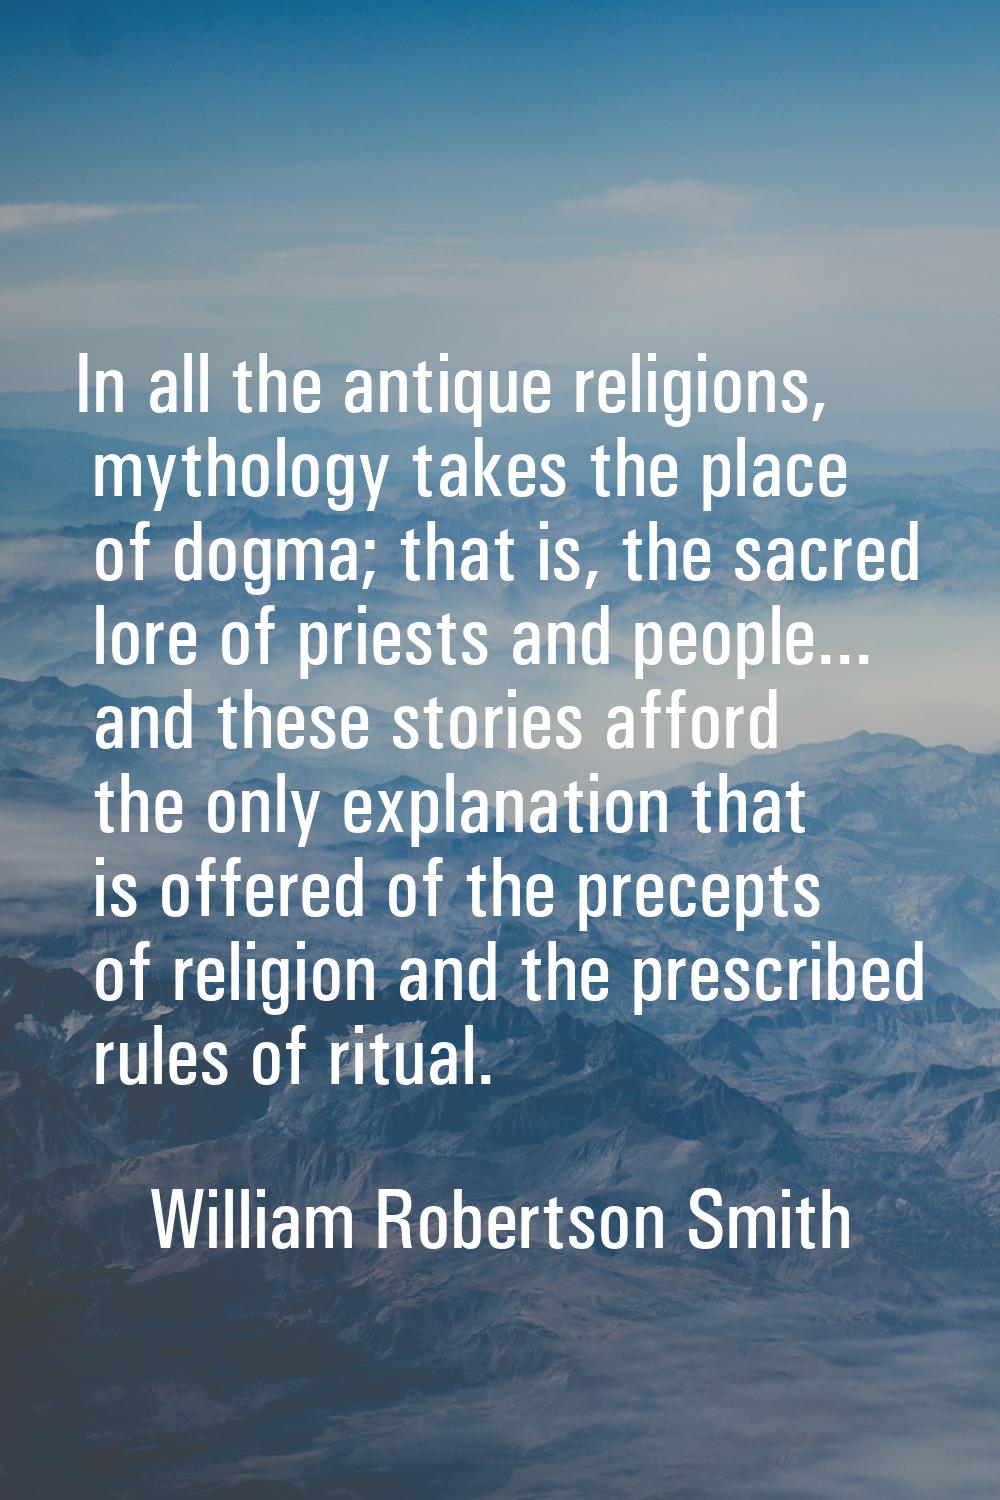 In all the antique religions, mythology takes the place of dogma; that is, the sacred lore of pries